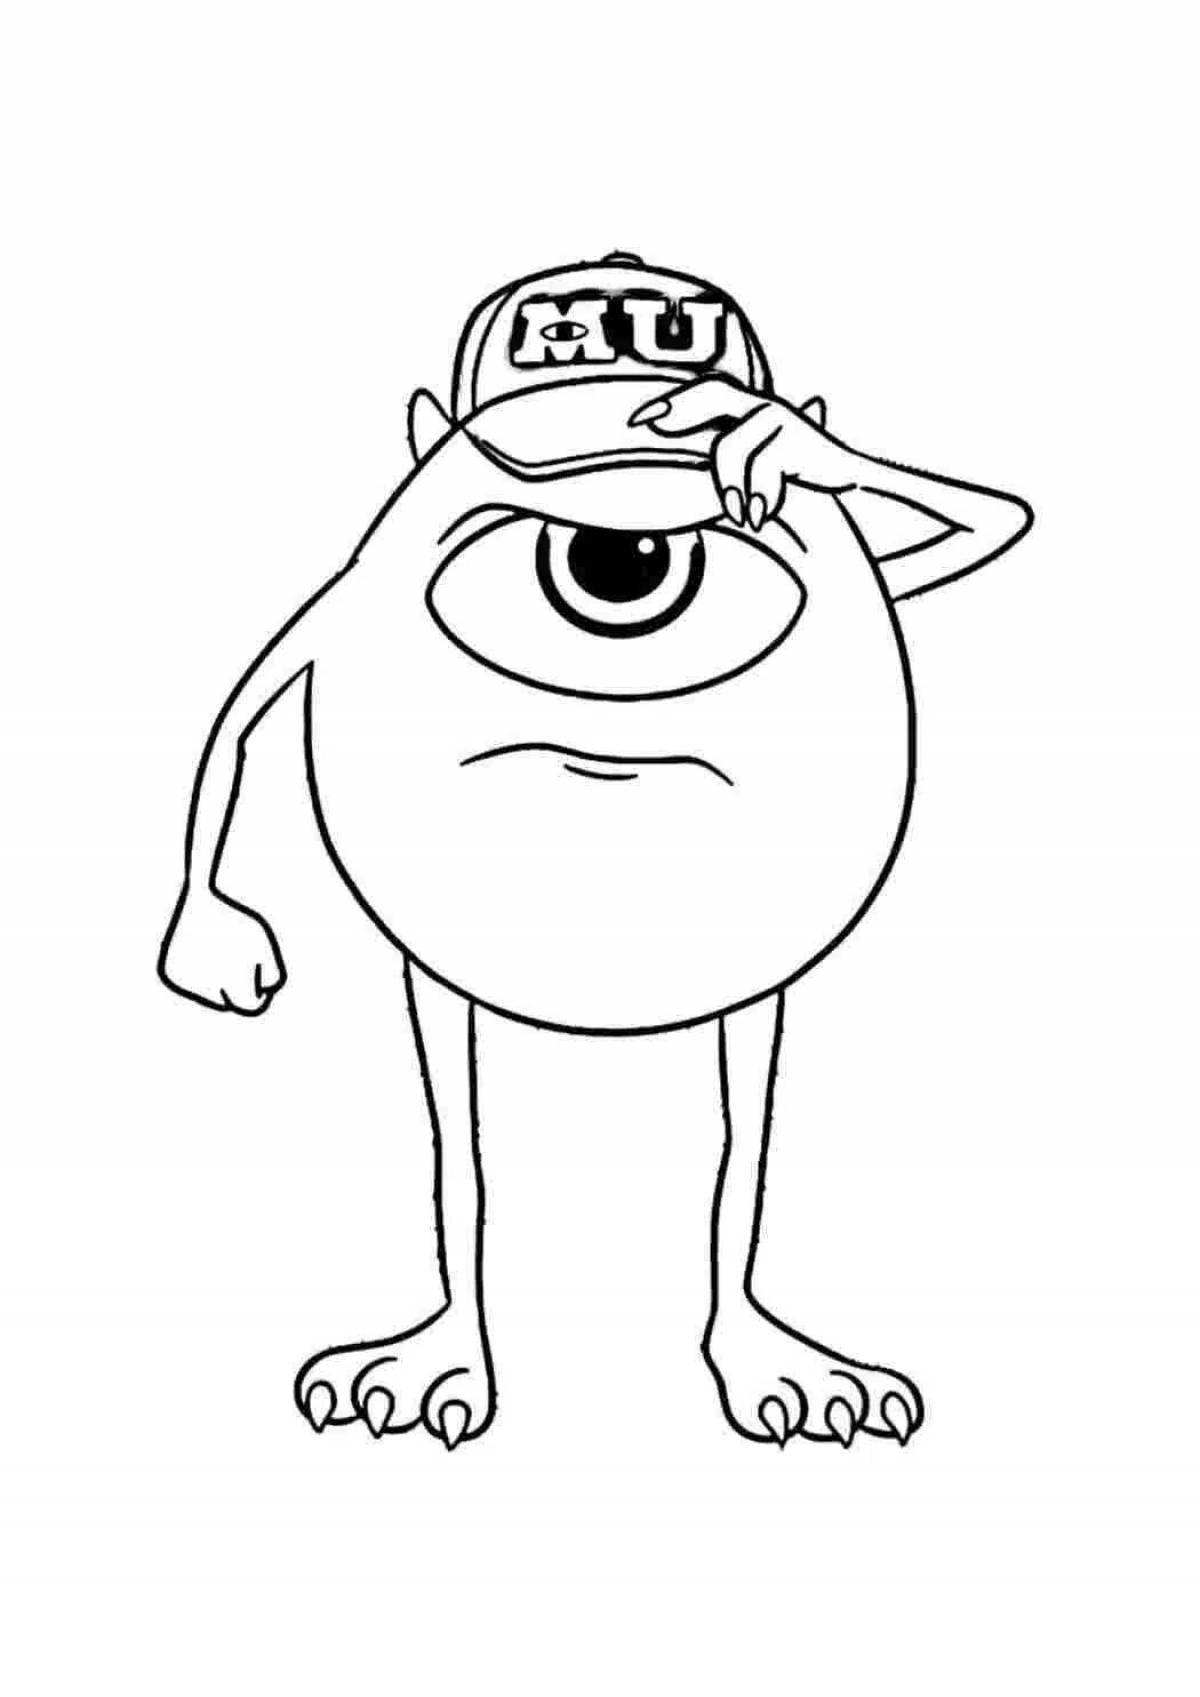 Mike wazowski funny coloring page